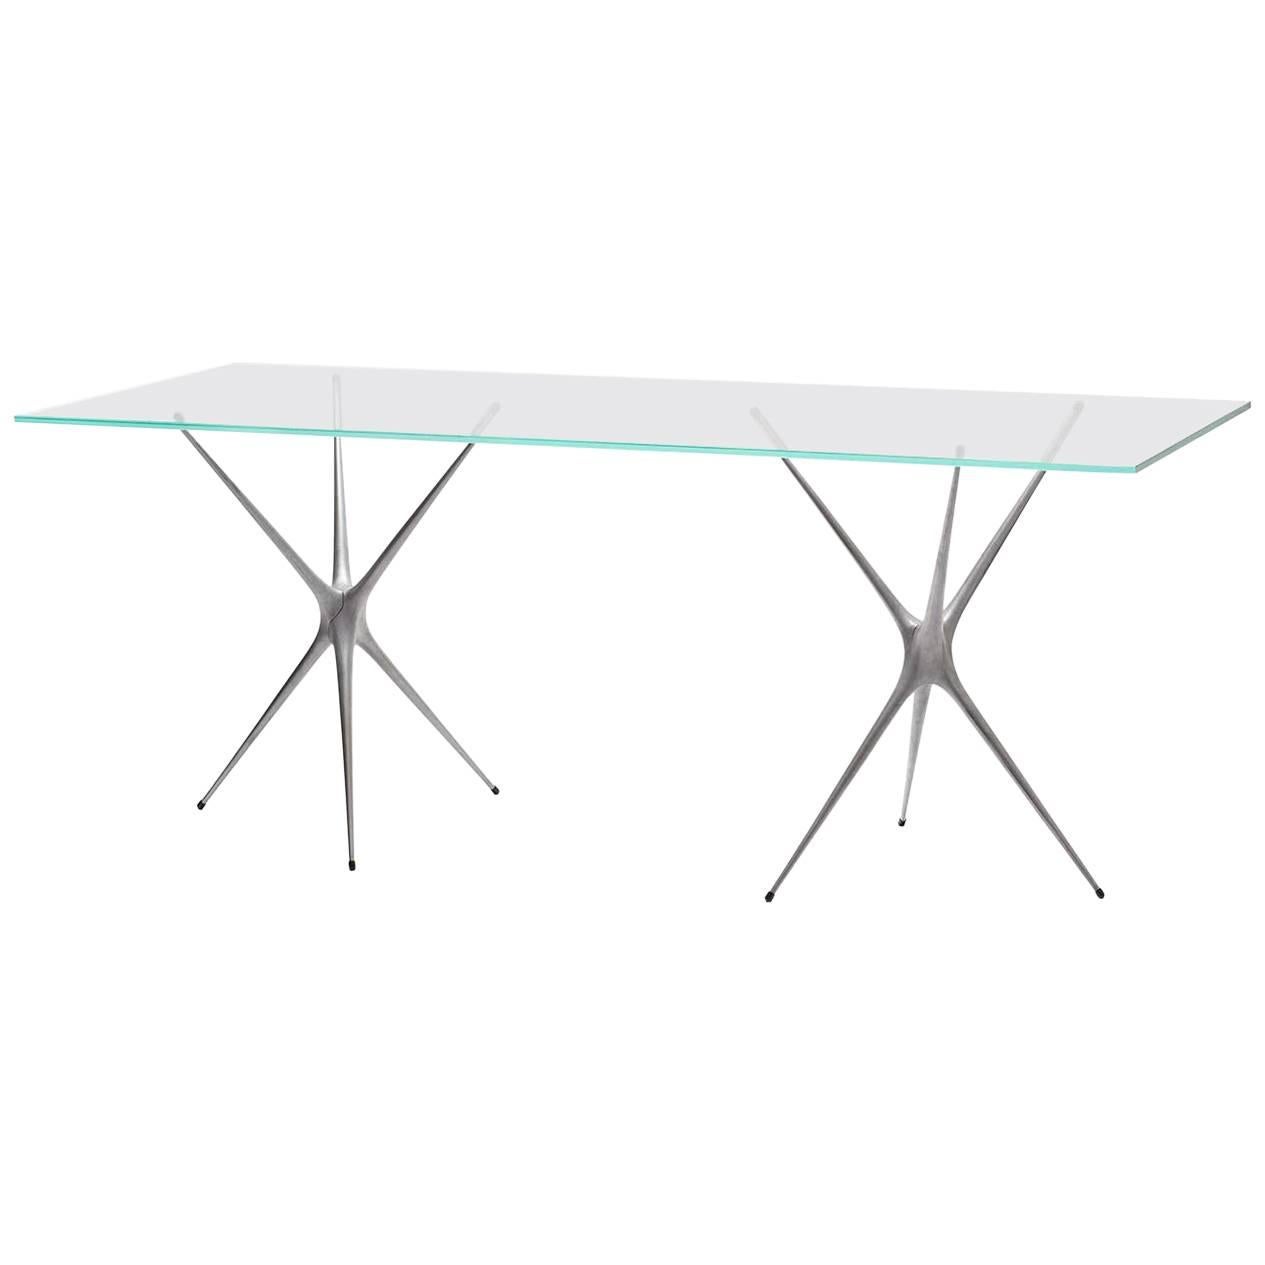 Supernova, Recycled Cast Aluminum Black Trestles & Glass Desk by Made in Ratio For Sale 1